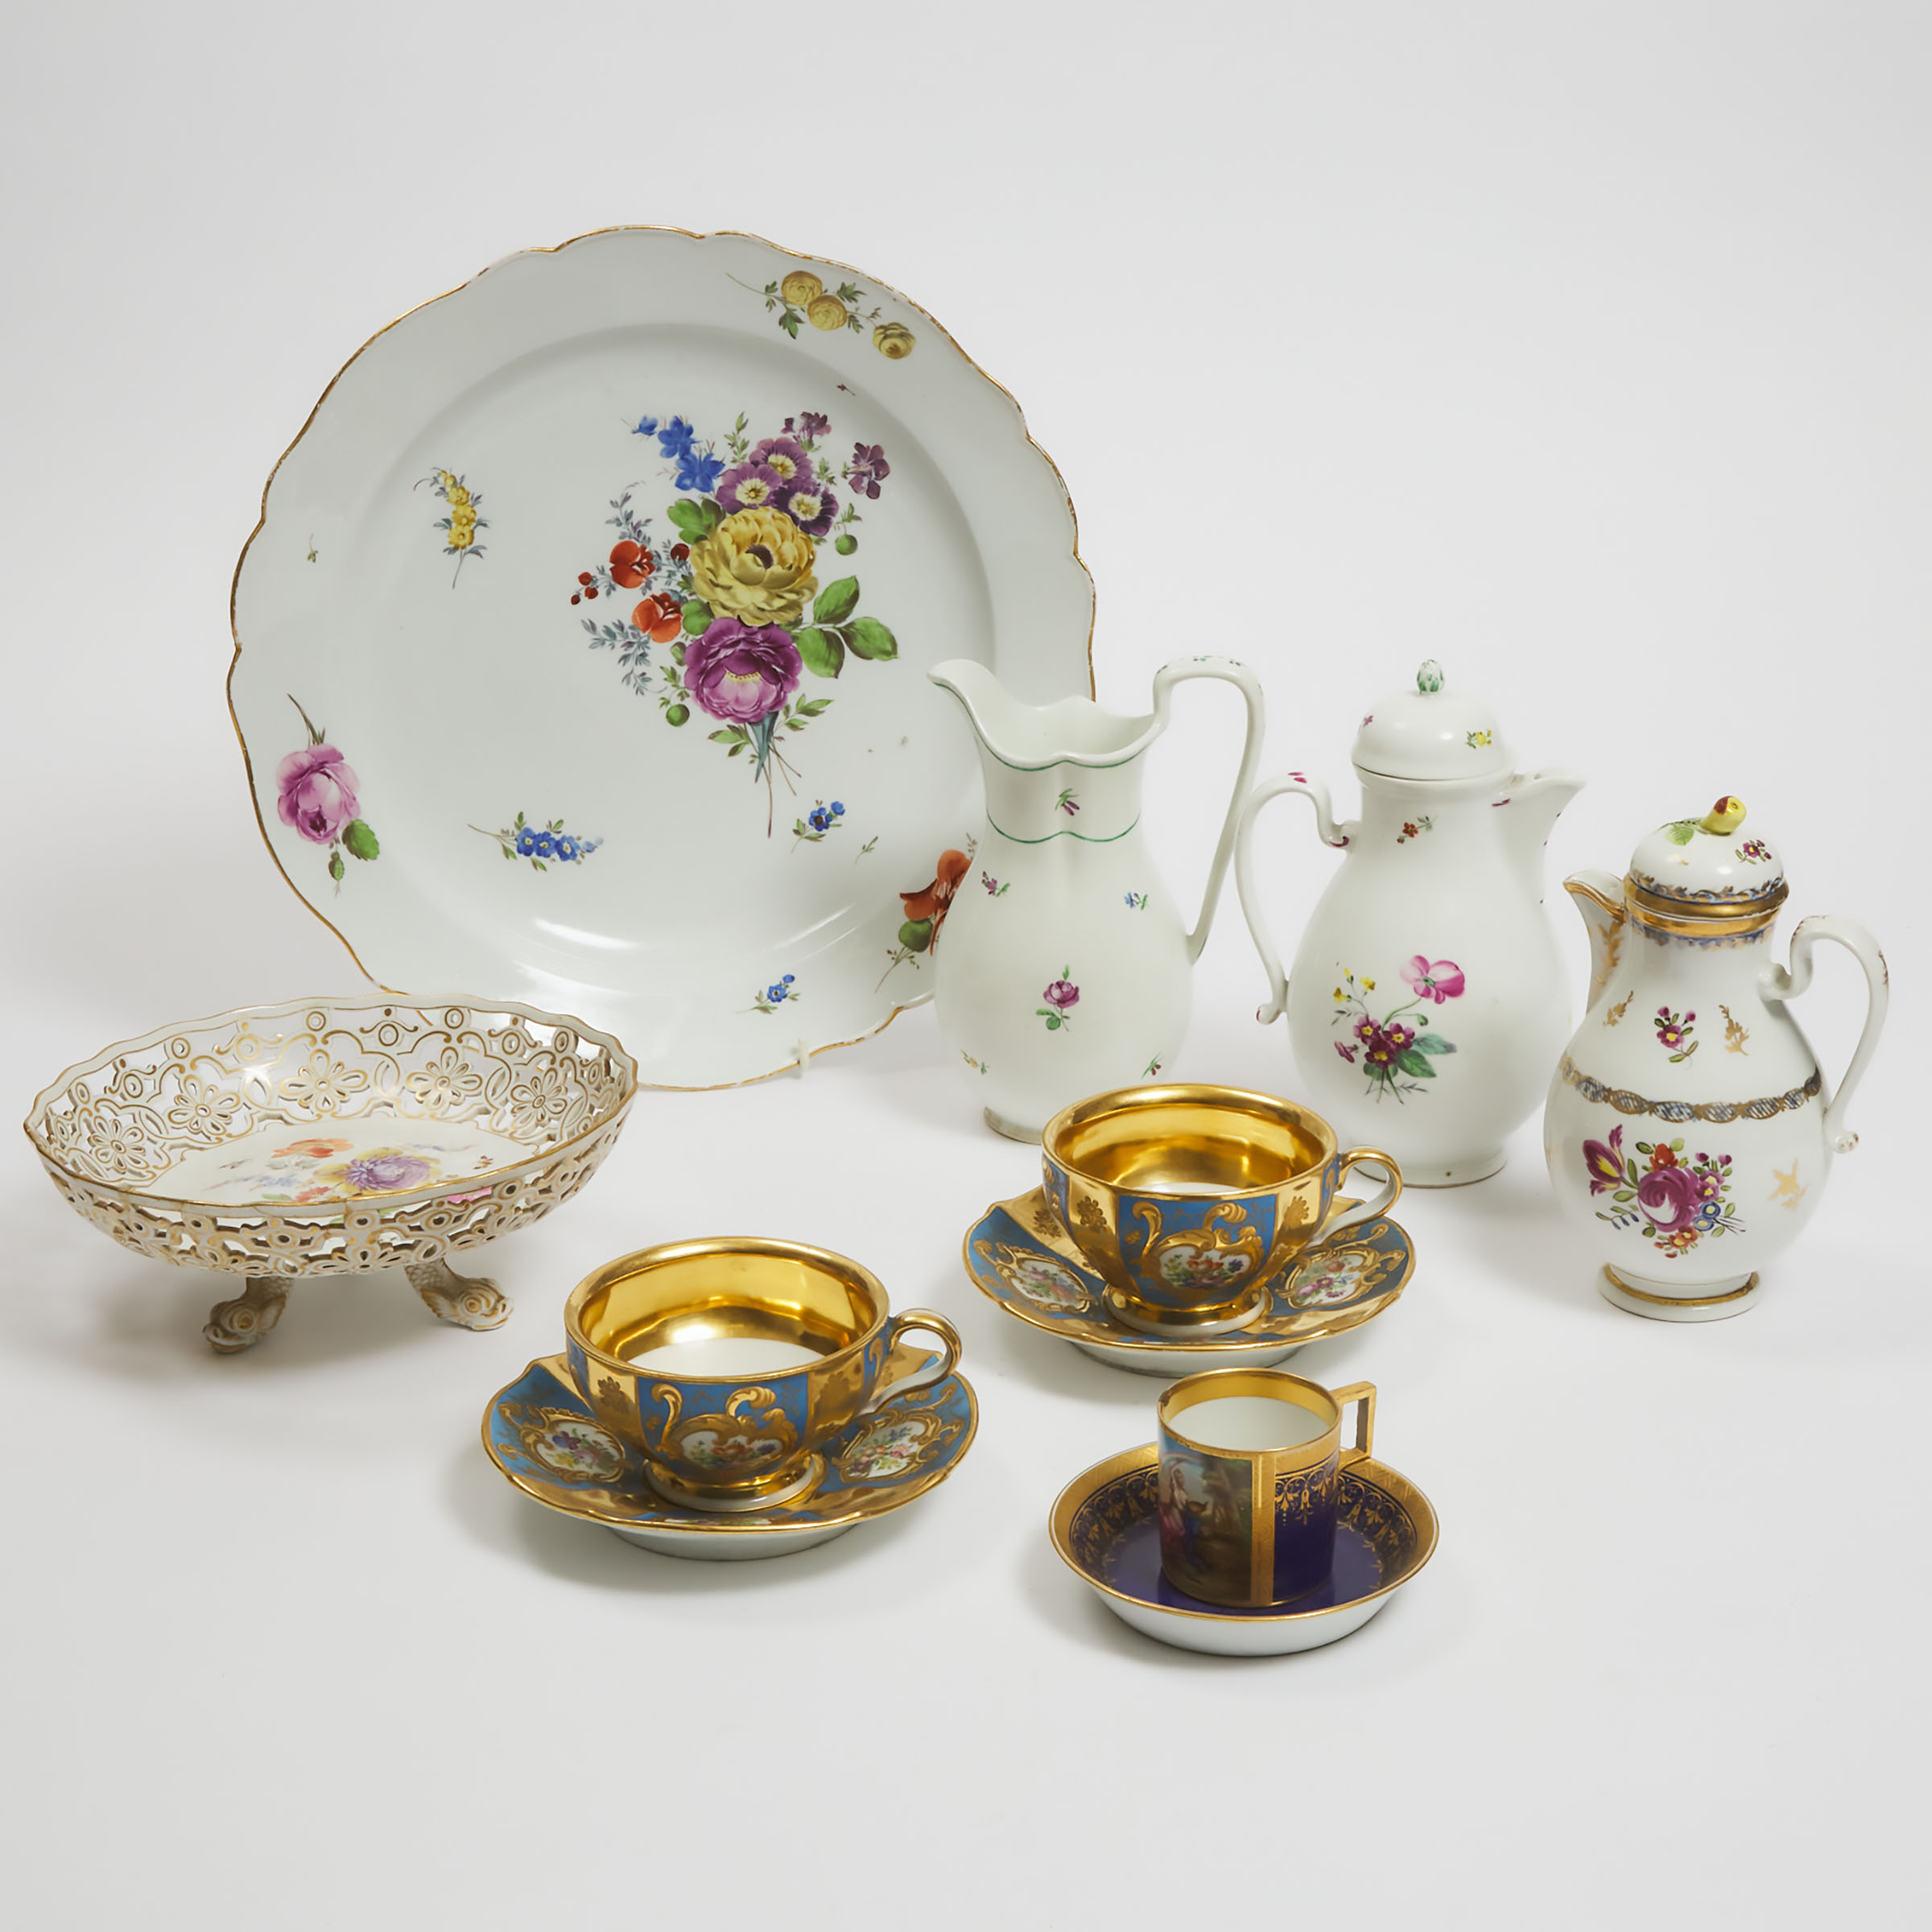 Group of Meissen and Vienna Porcelain, late 18th/19th century